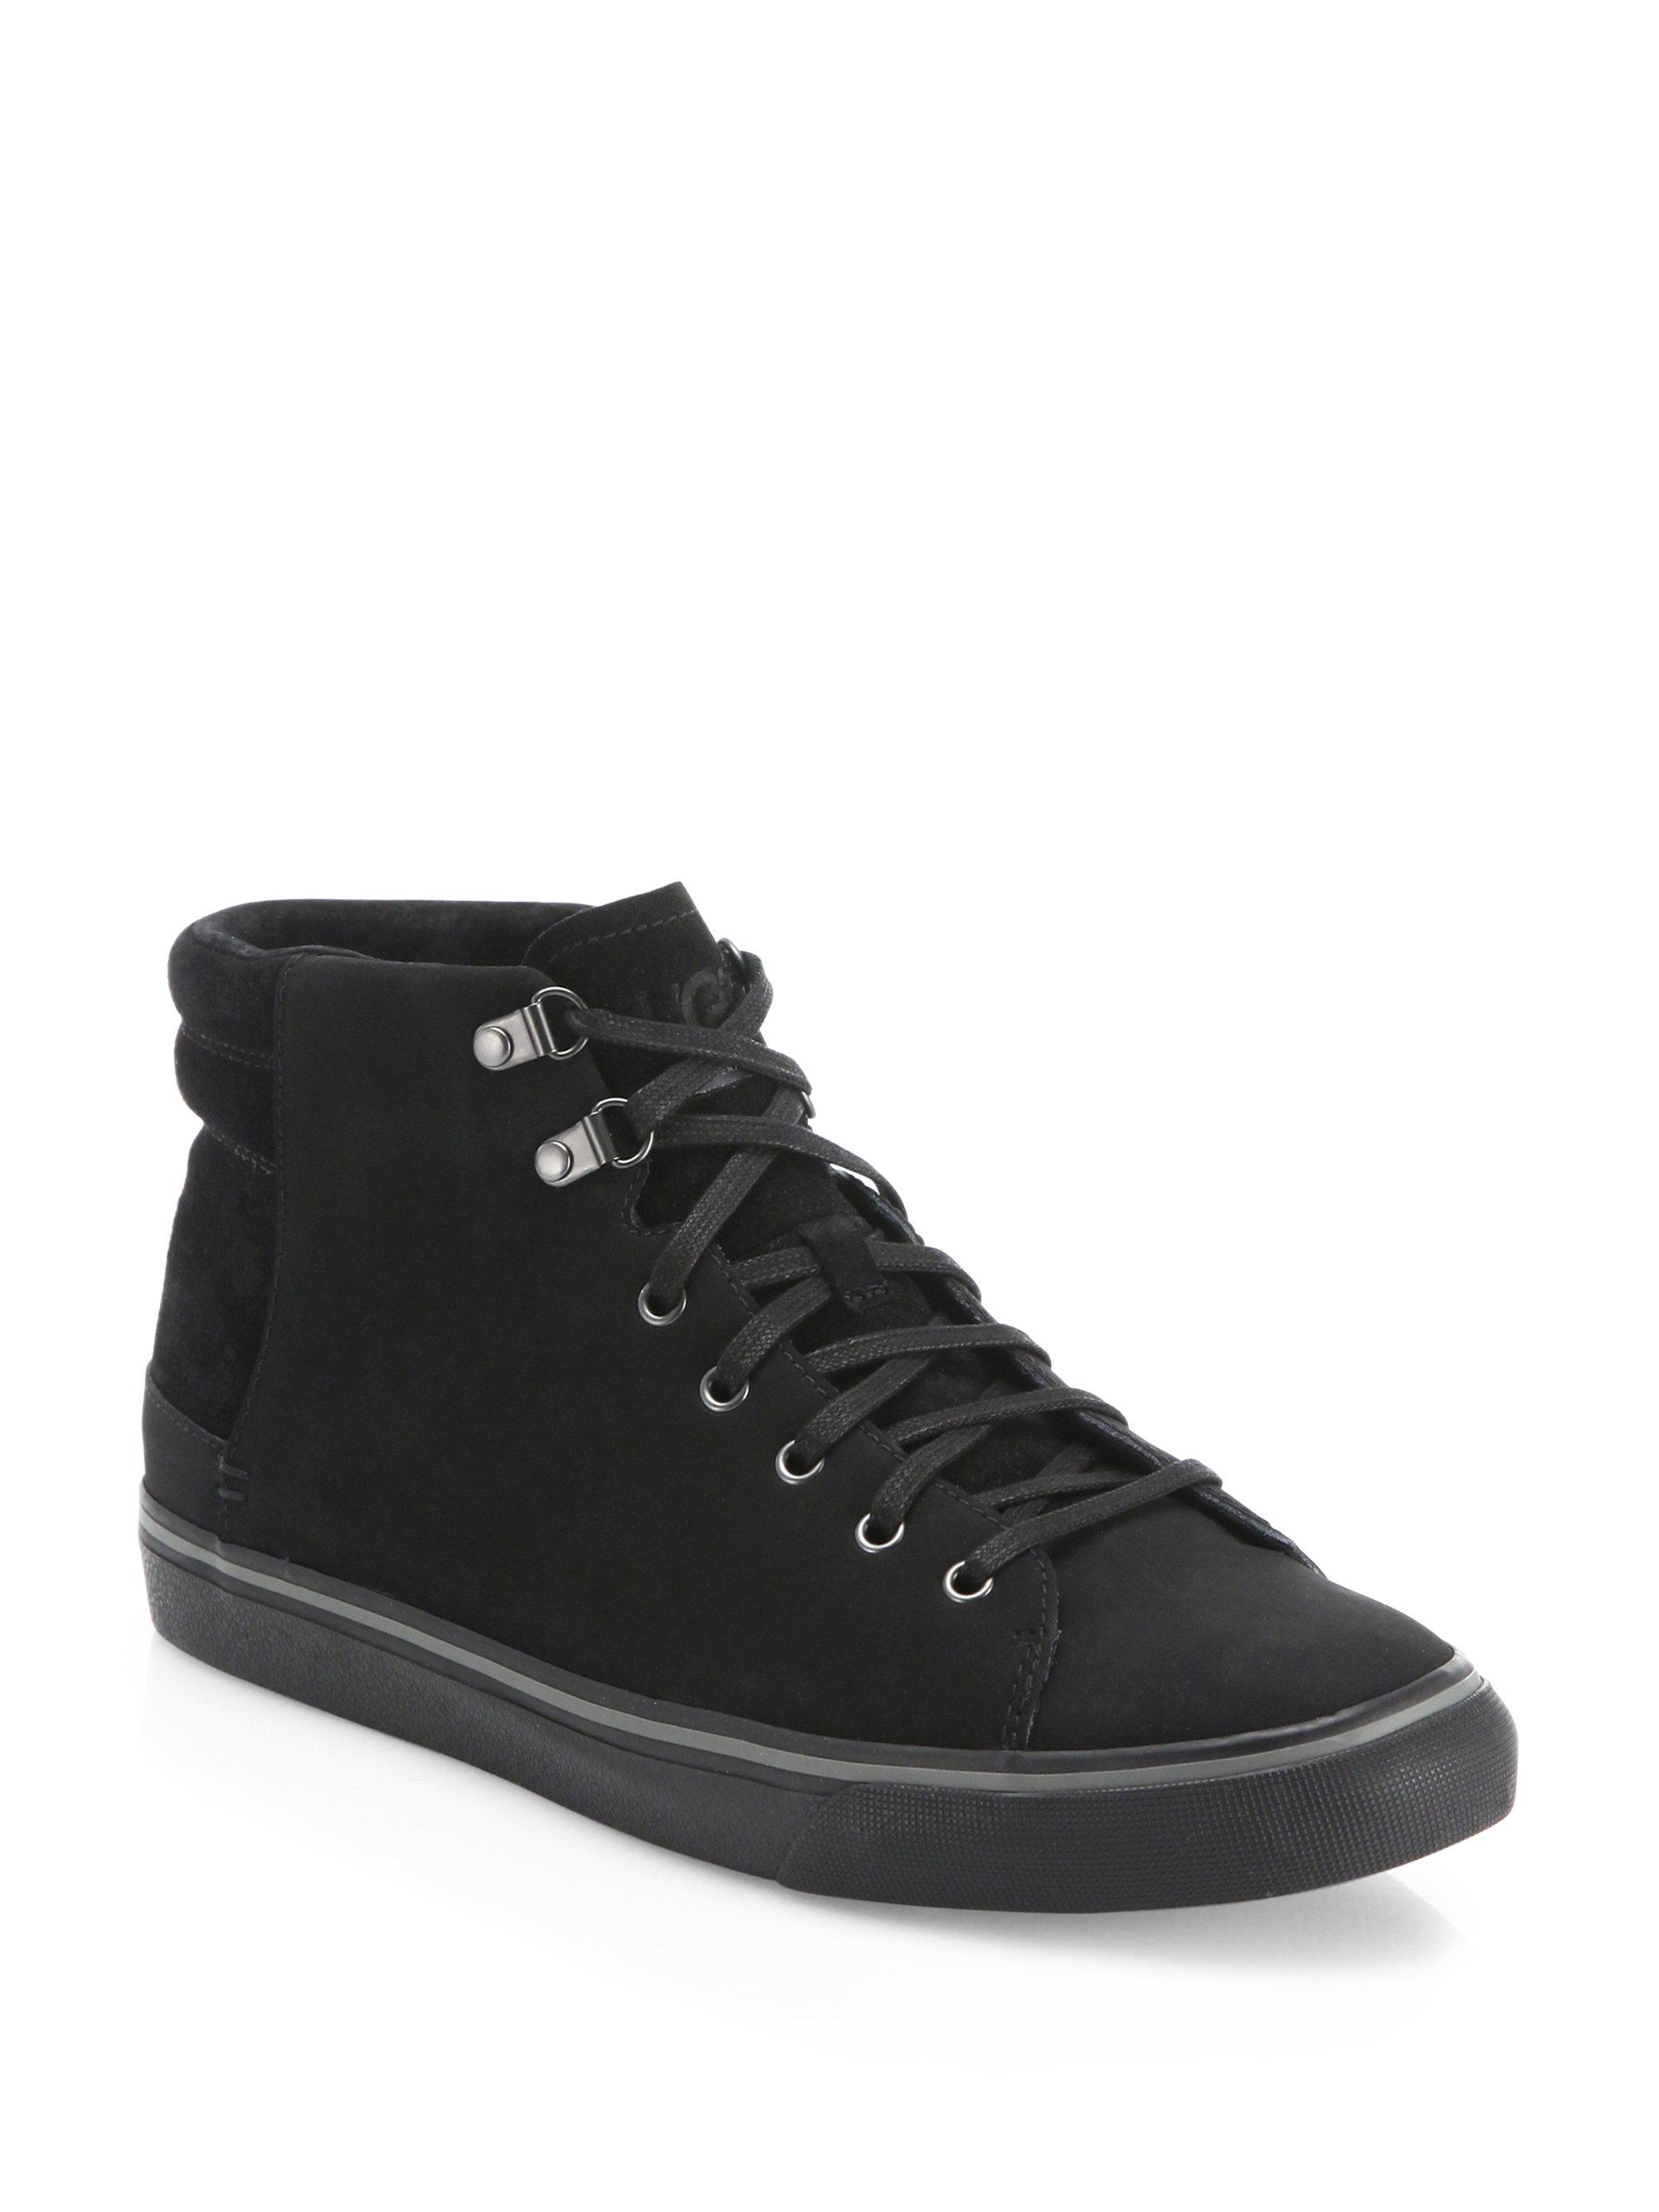 Lyst - Ugg Hoyt Leather & Suede Sneakers in Black for Men